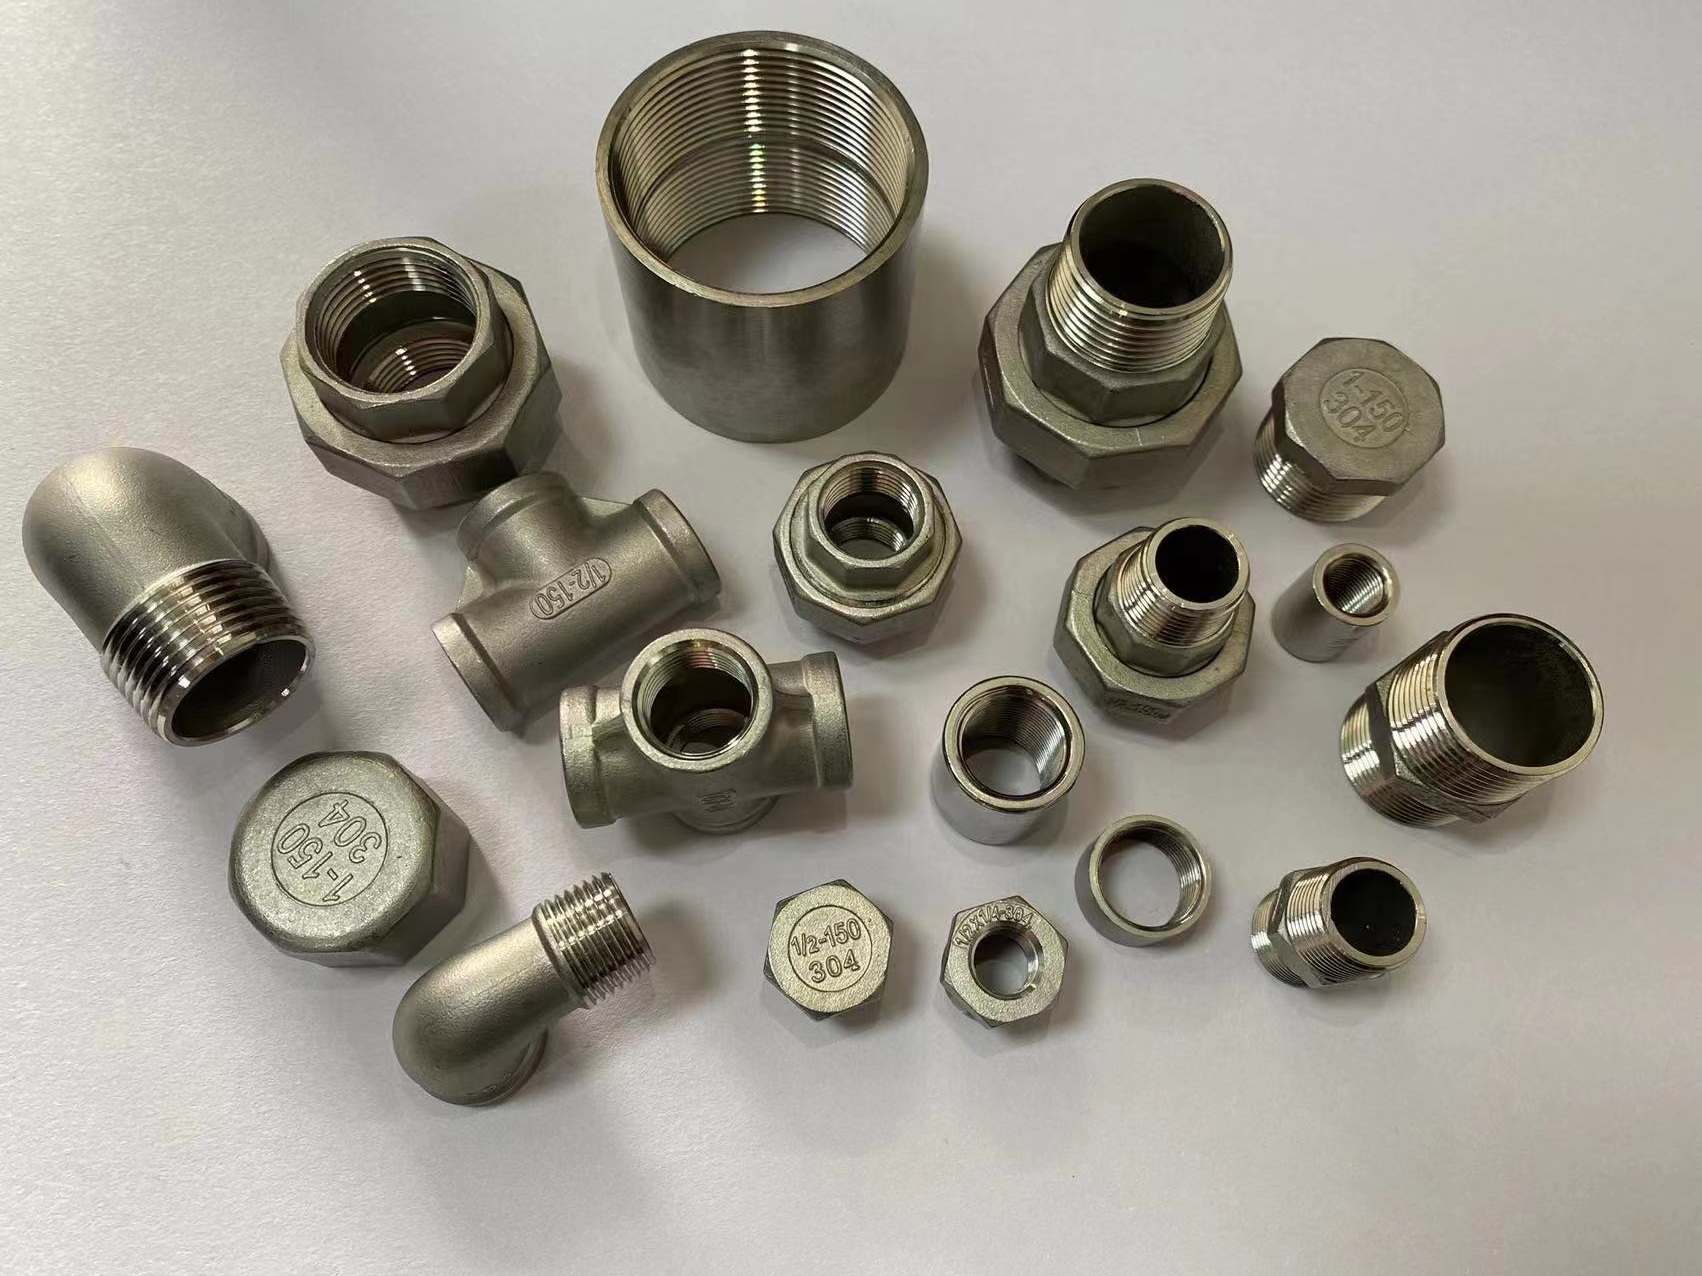 Stainless Steel Pipe Fittings 304 1/4"-4" NPT/BSPT 45 Degree Elbow